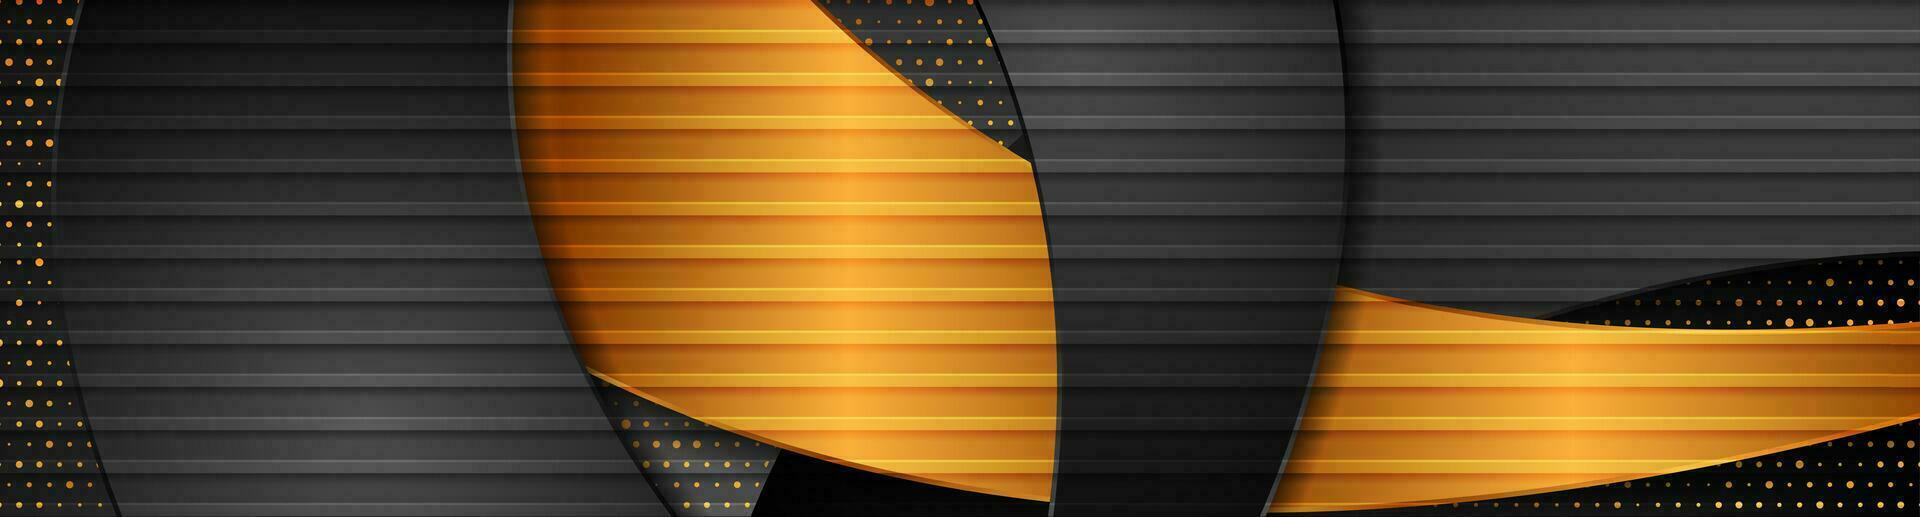 Abstract modern black golden banner with waves and dots vector